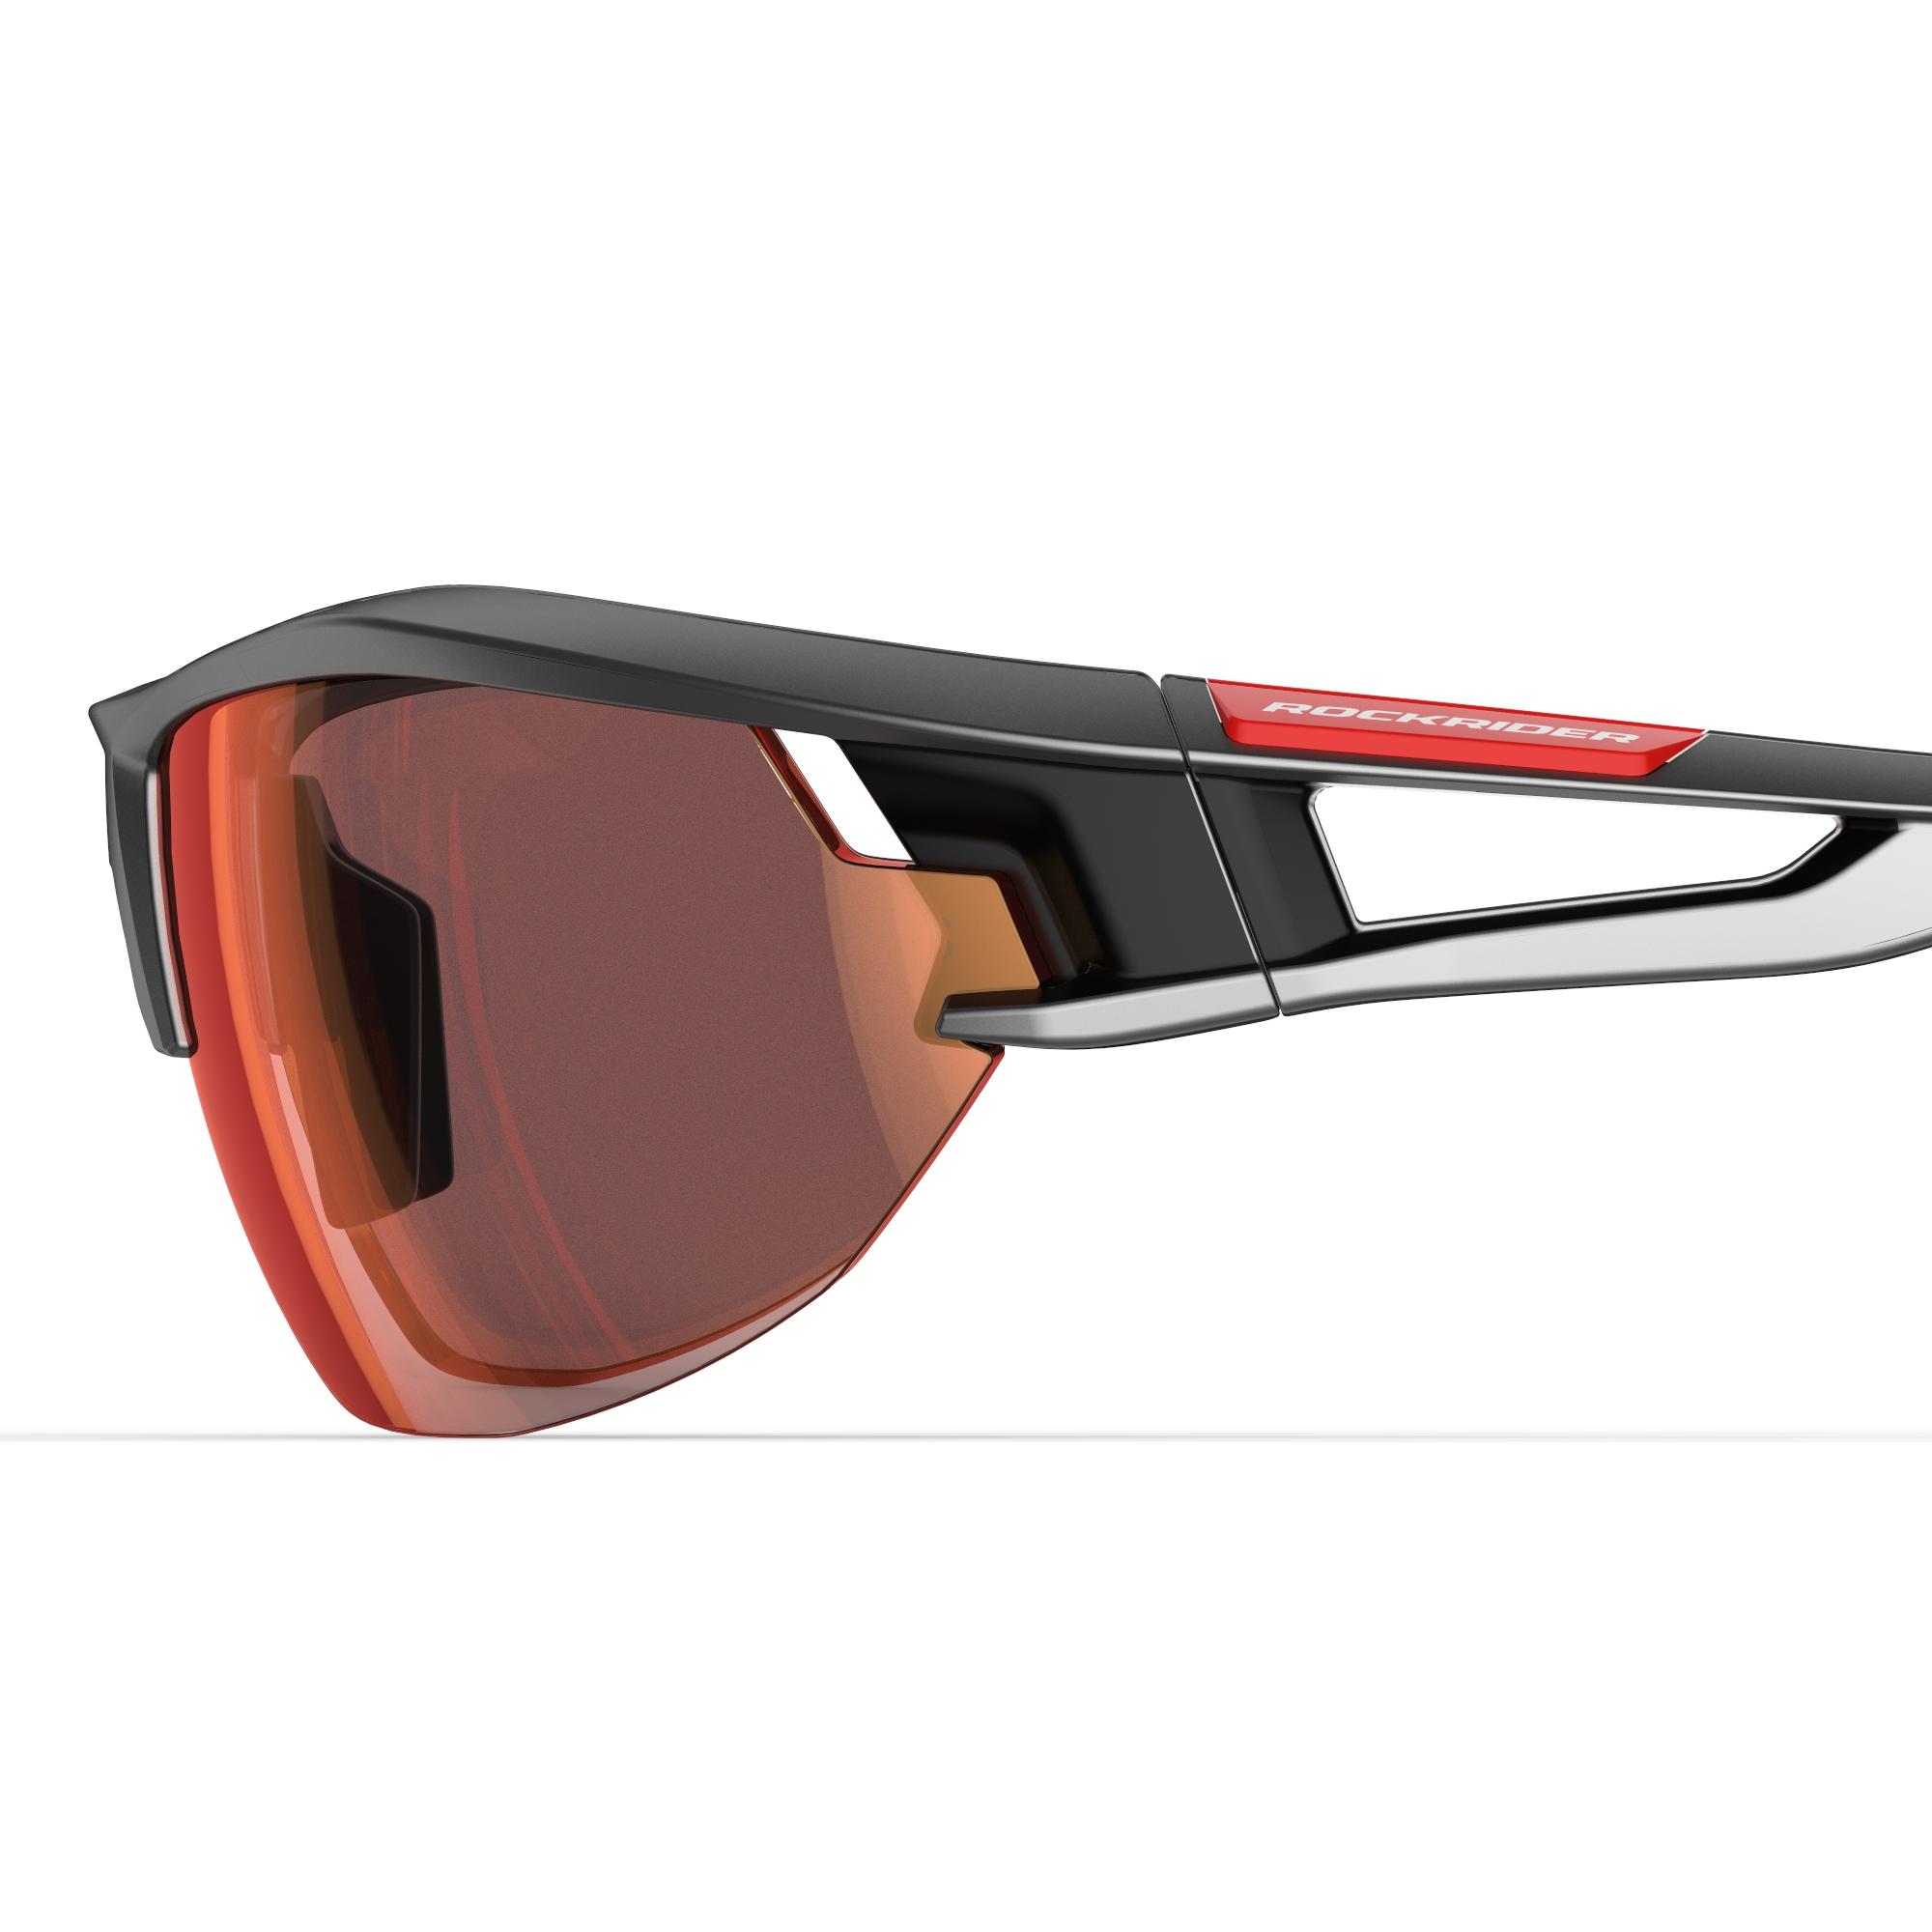 XC 120 Adult Cycling Photochromic Sunglasses Category 1 to 3 - Grey and Red 3/7